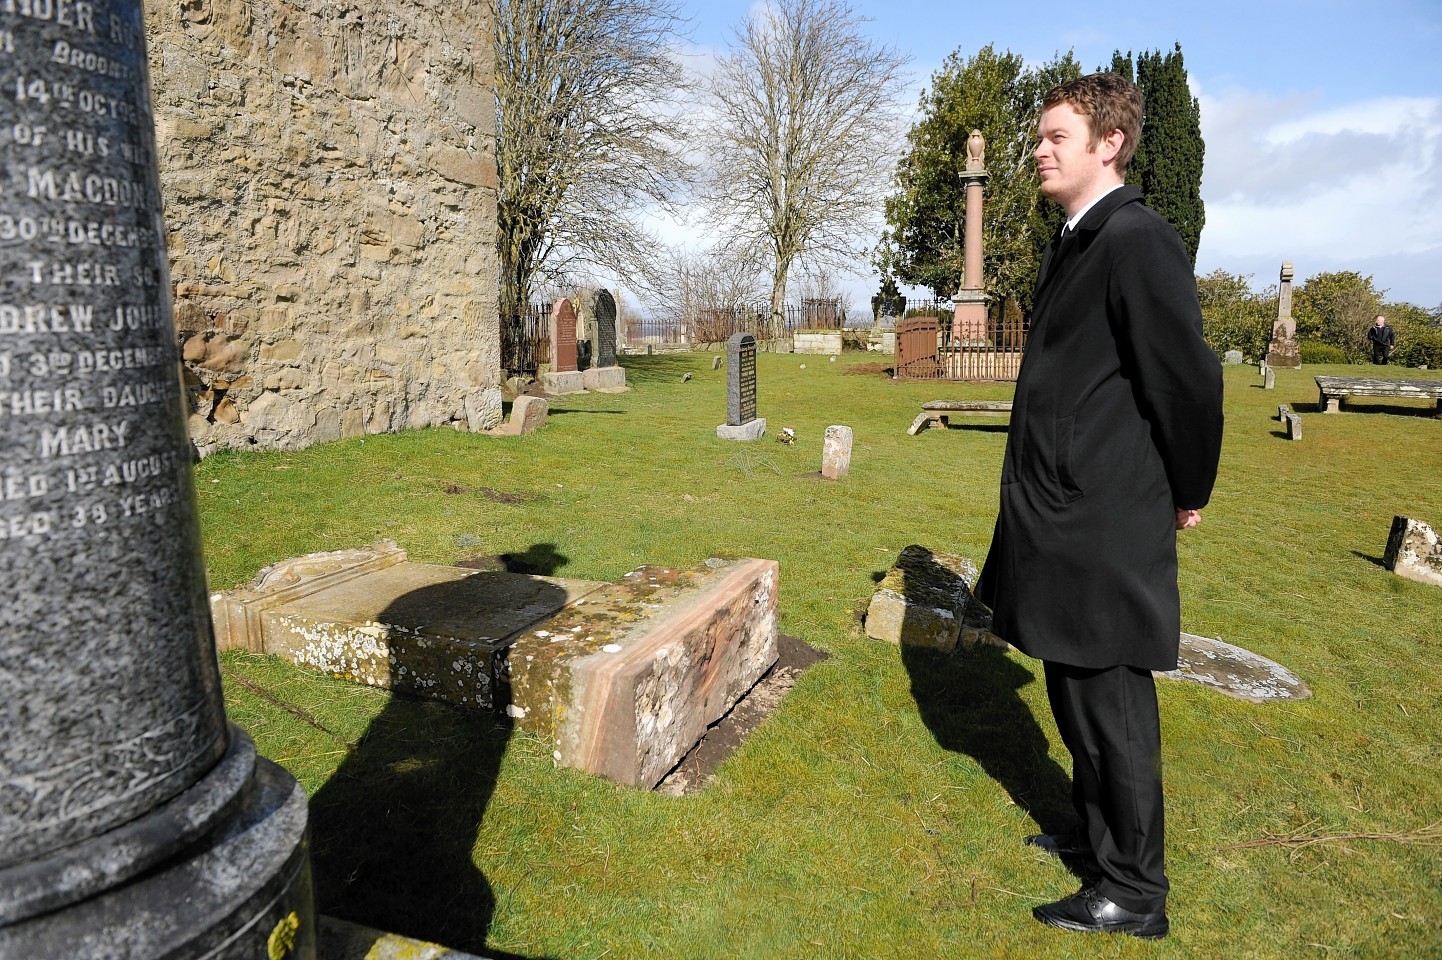 Undertaker Jack Rhind stands next to one of the toppled stones